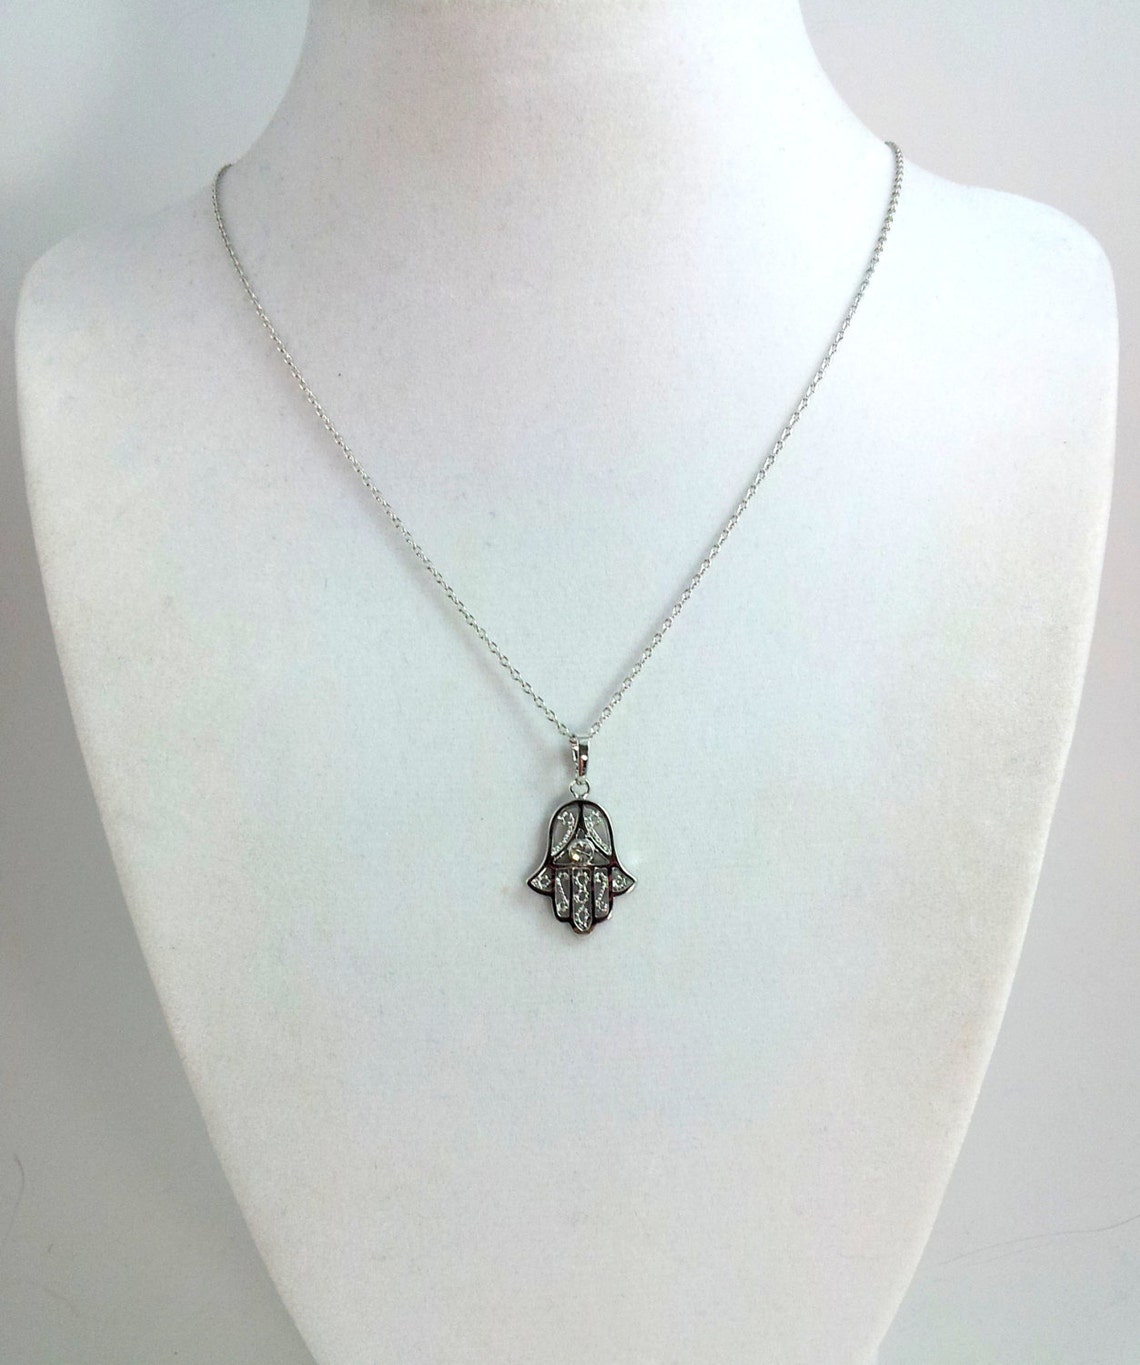 Silver Hamsa Necklace White Gold Filled Silver Hand of Fatima | Etsy